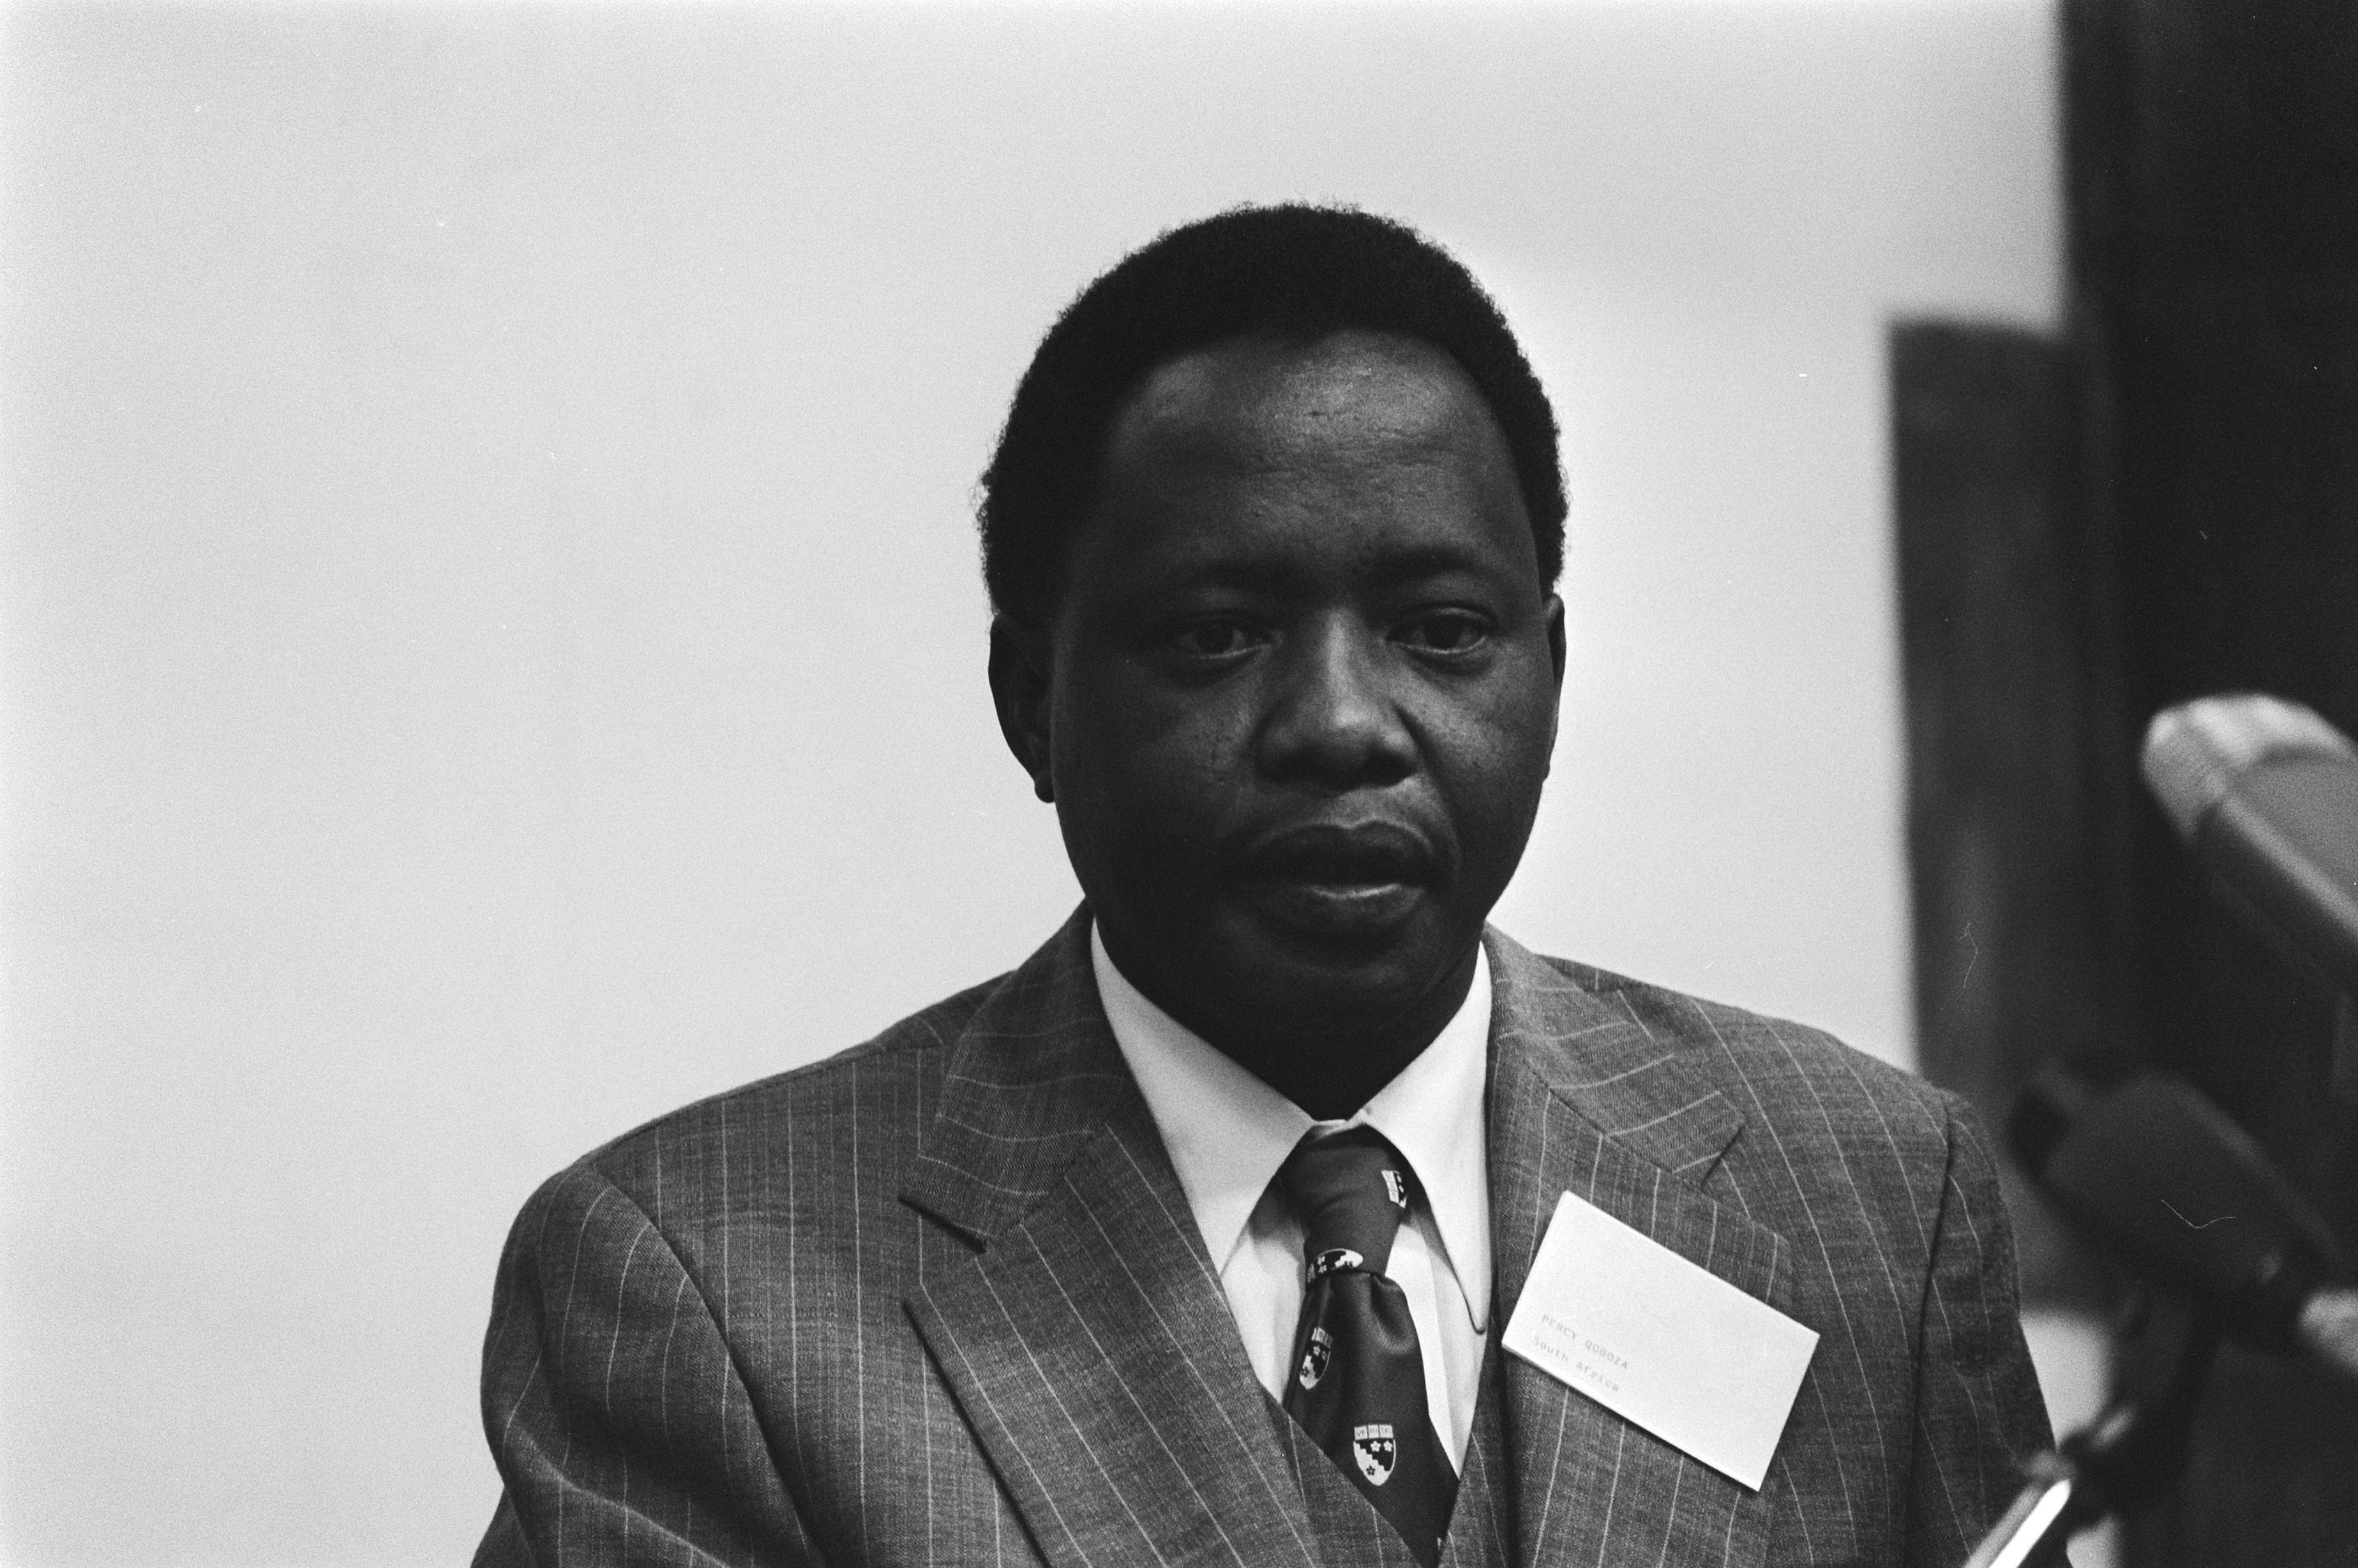 Percy Qoboza, South African journalist and author (b. 1938) died on January 17, 1988.